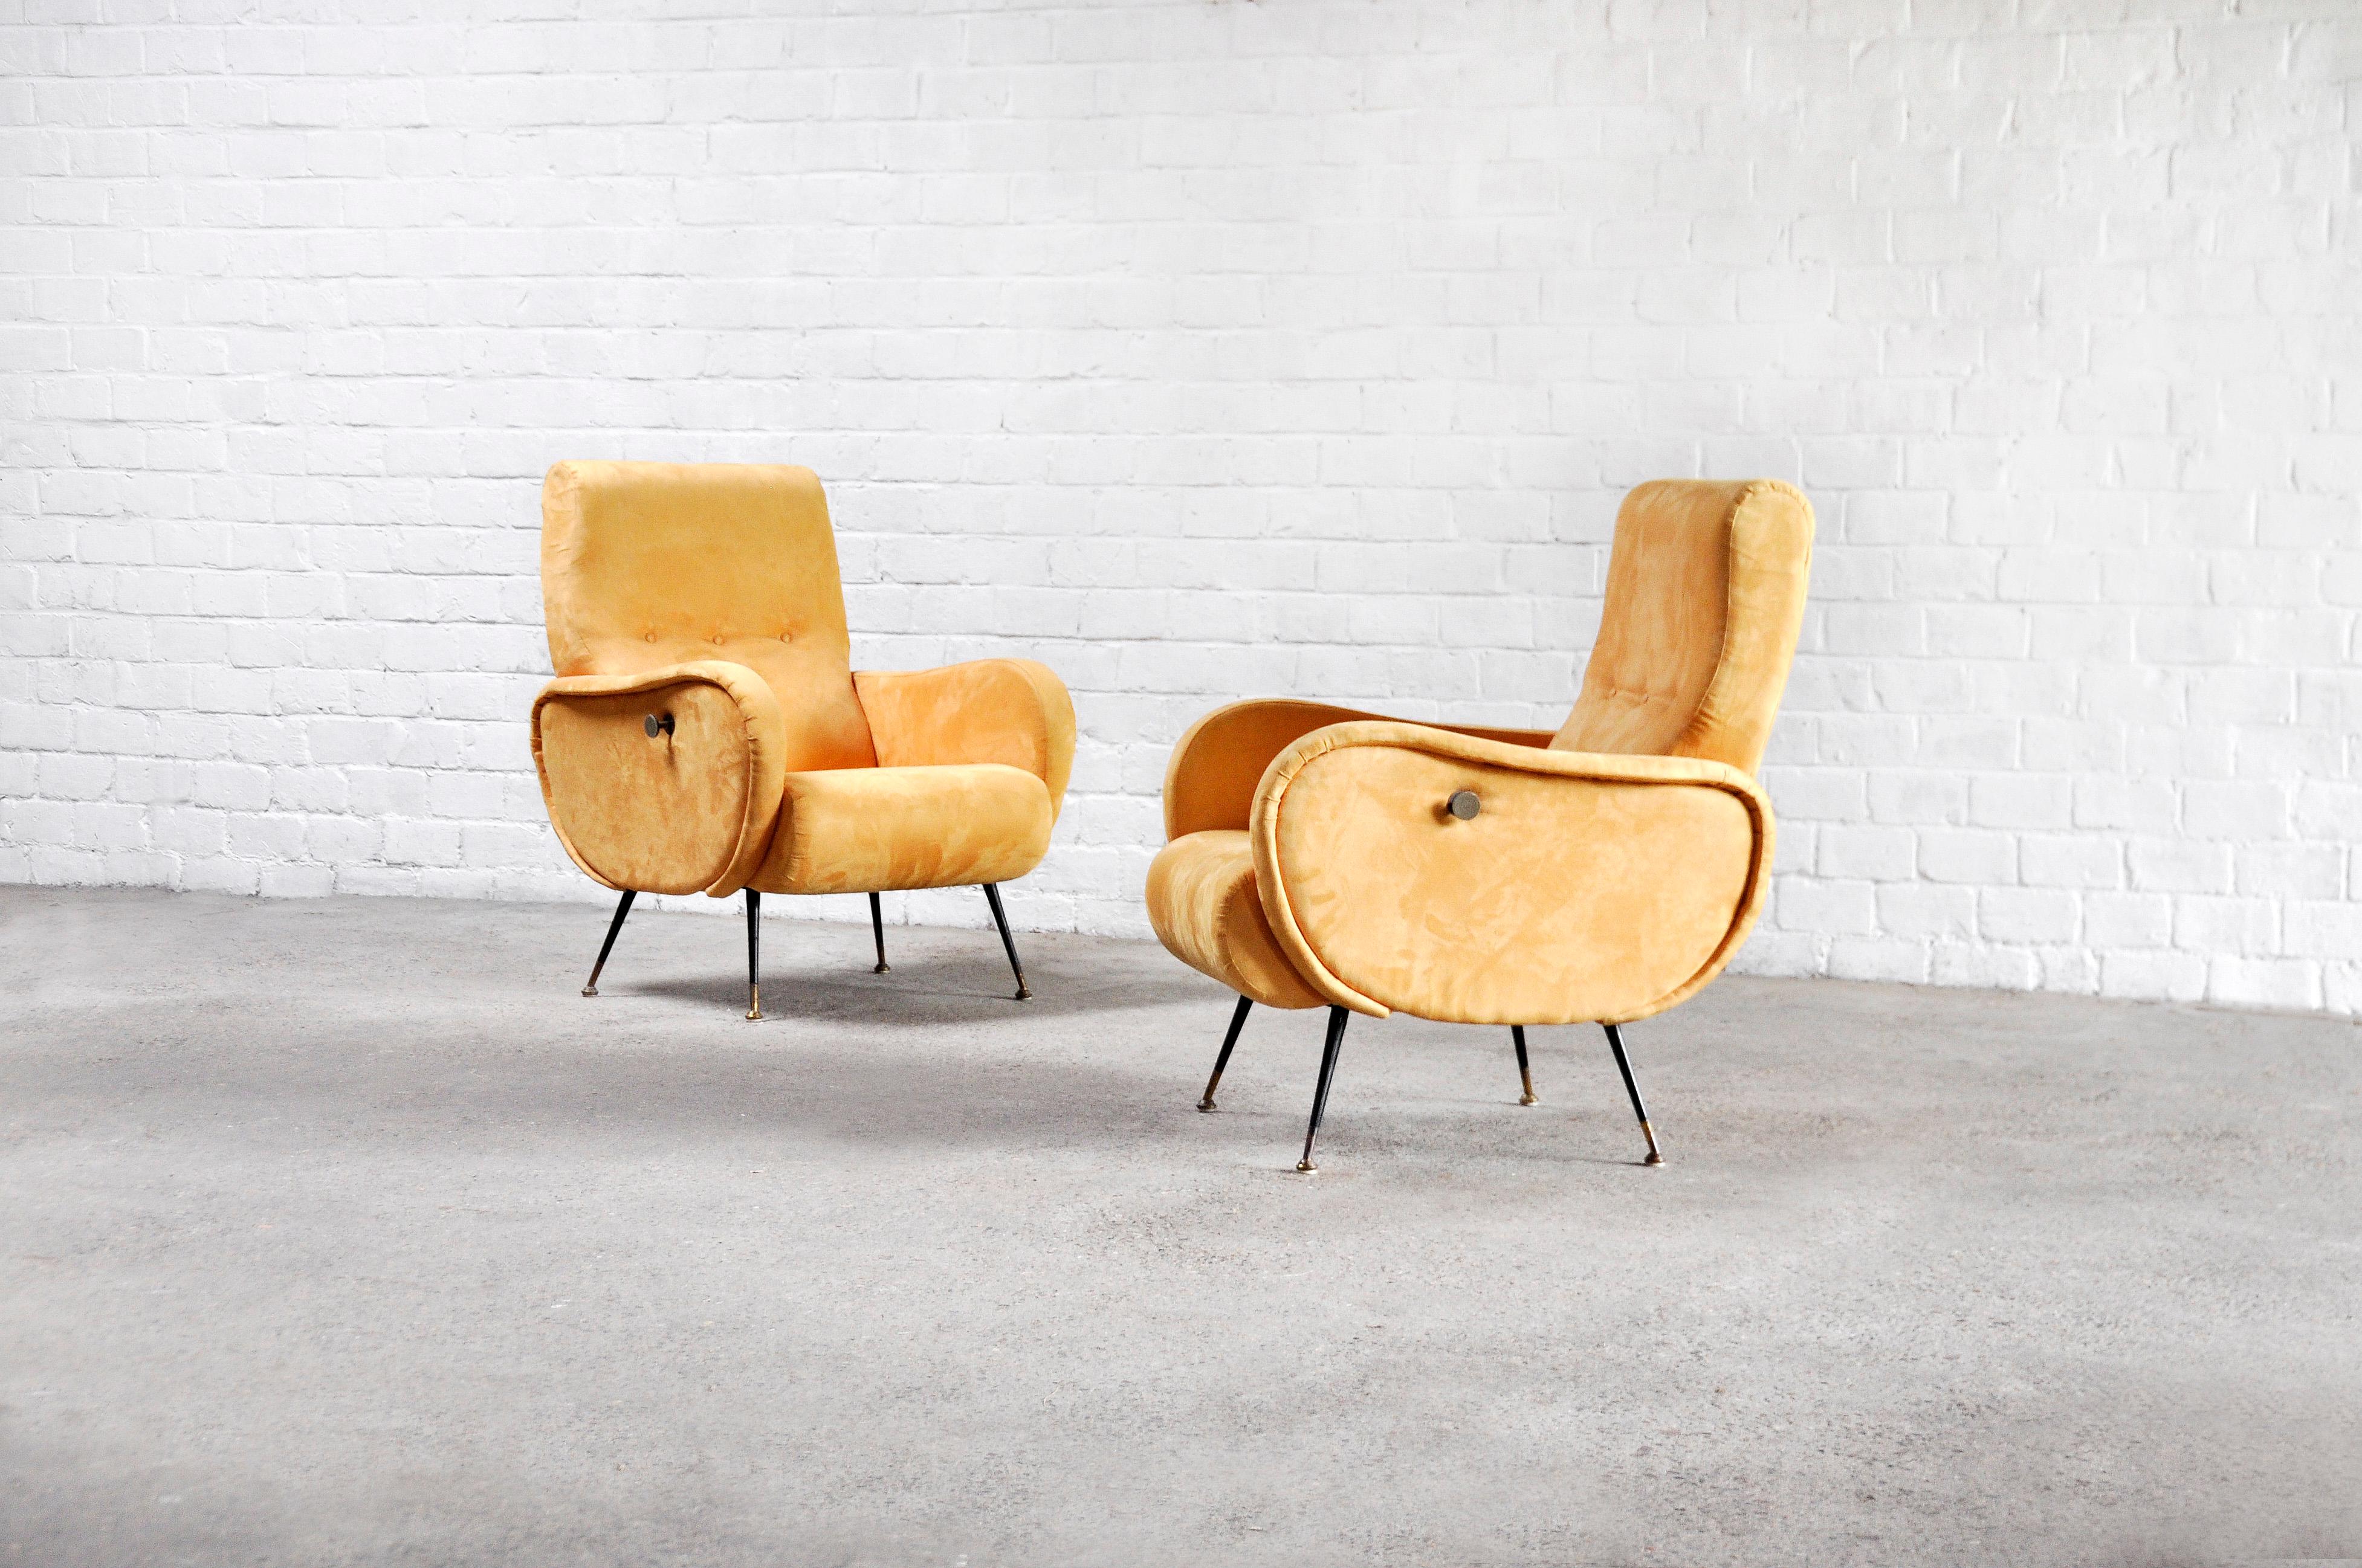 Pair of midcentury Italian armchairs attributed to Marco Zanuso, Italy 1950’s. The armchairs are newly lined in a very attractive yellow velvet fabric. The particularity of the seats is their mechanism that makes the armchair reclining for extreme